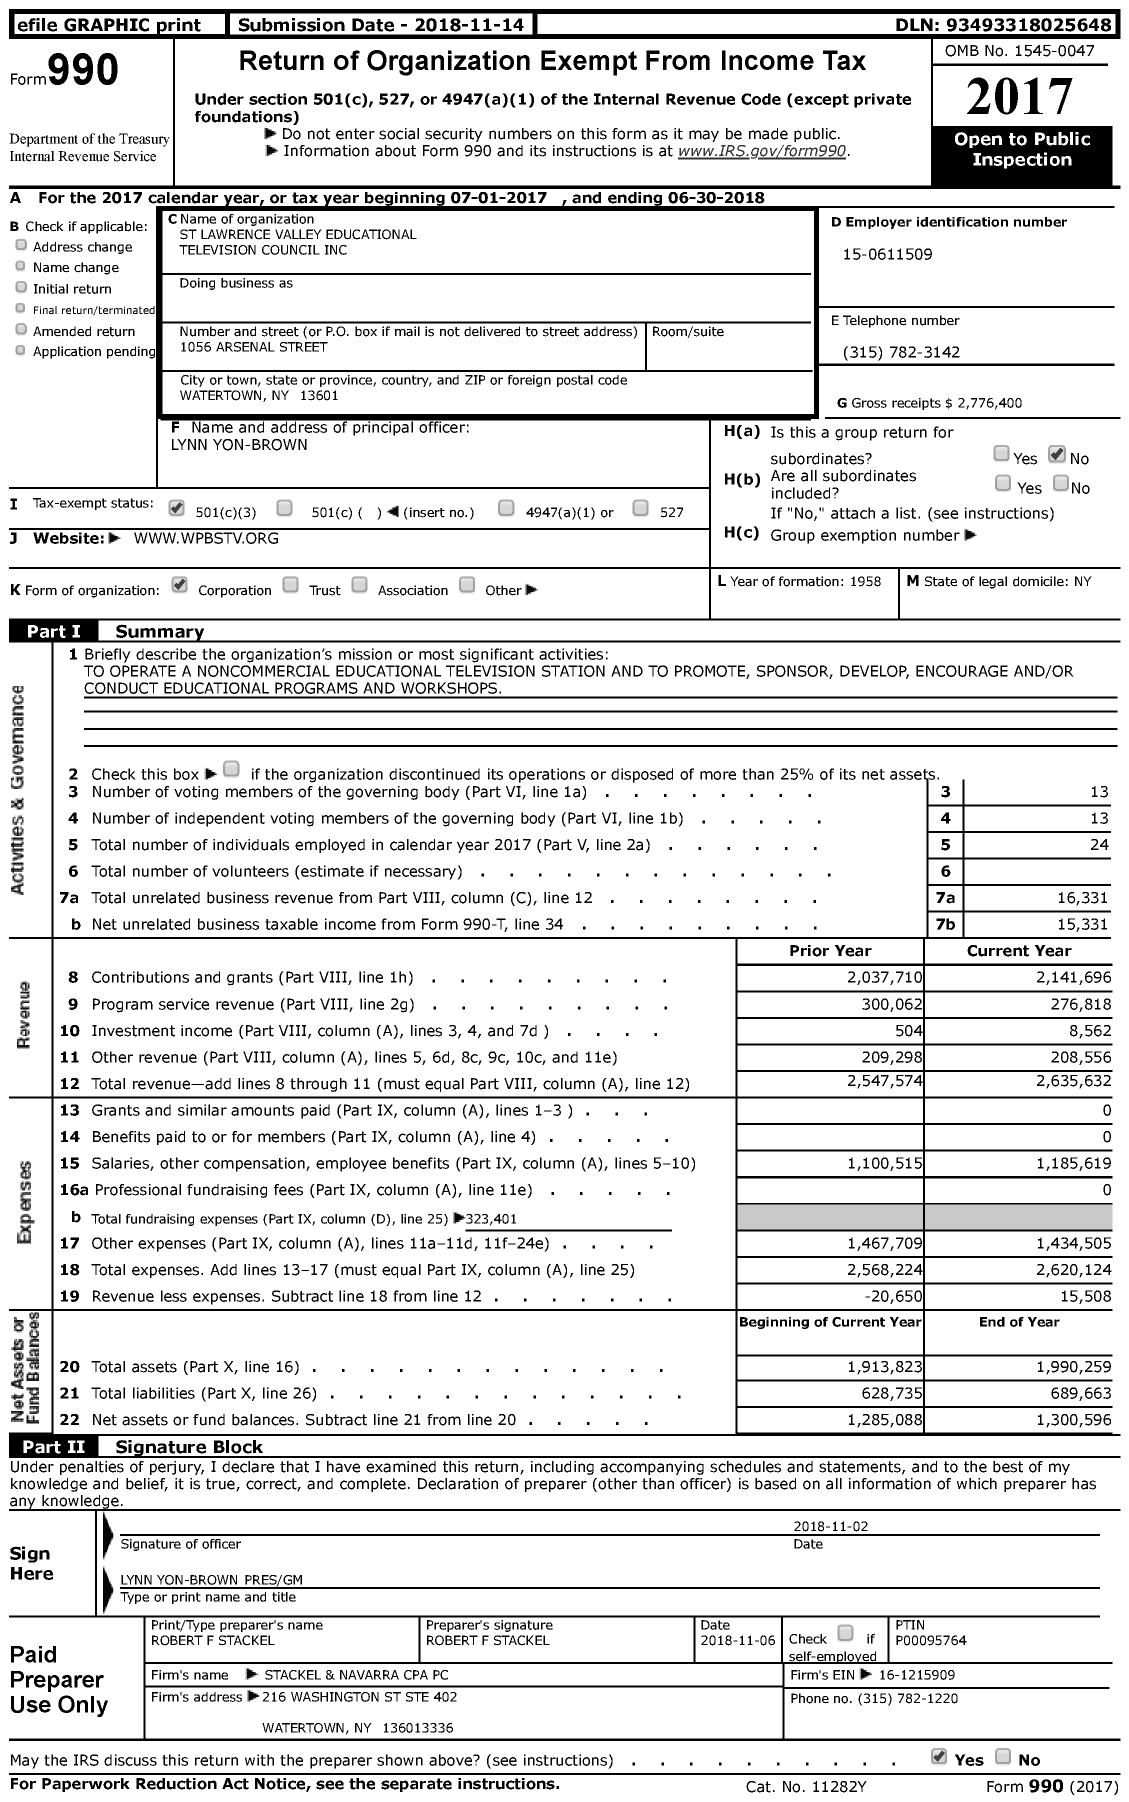 Image of first page of 2017 Form 990 for Wpbs-DT